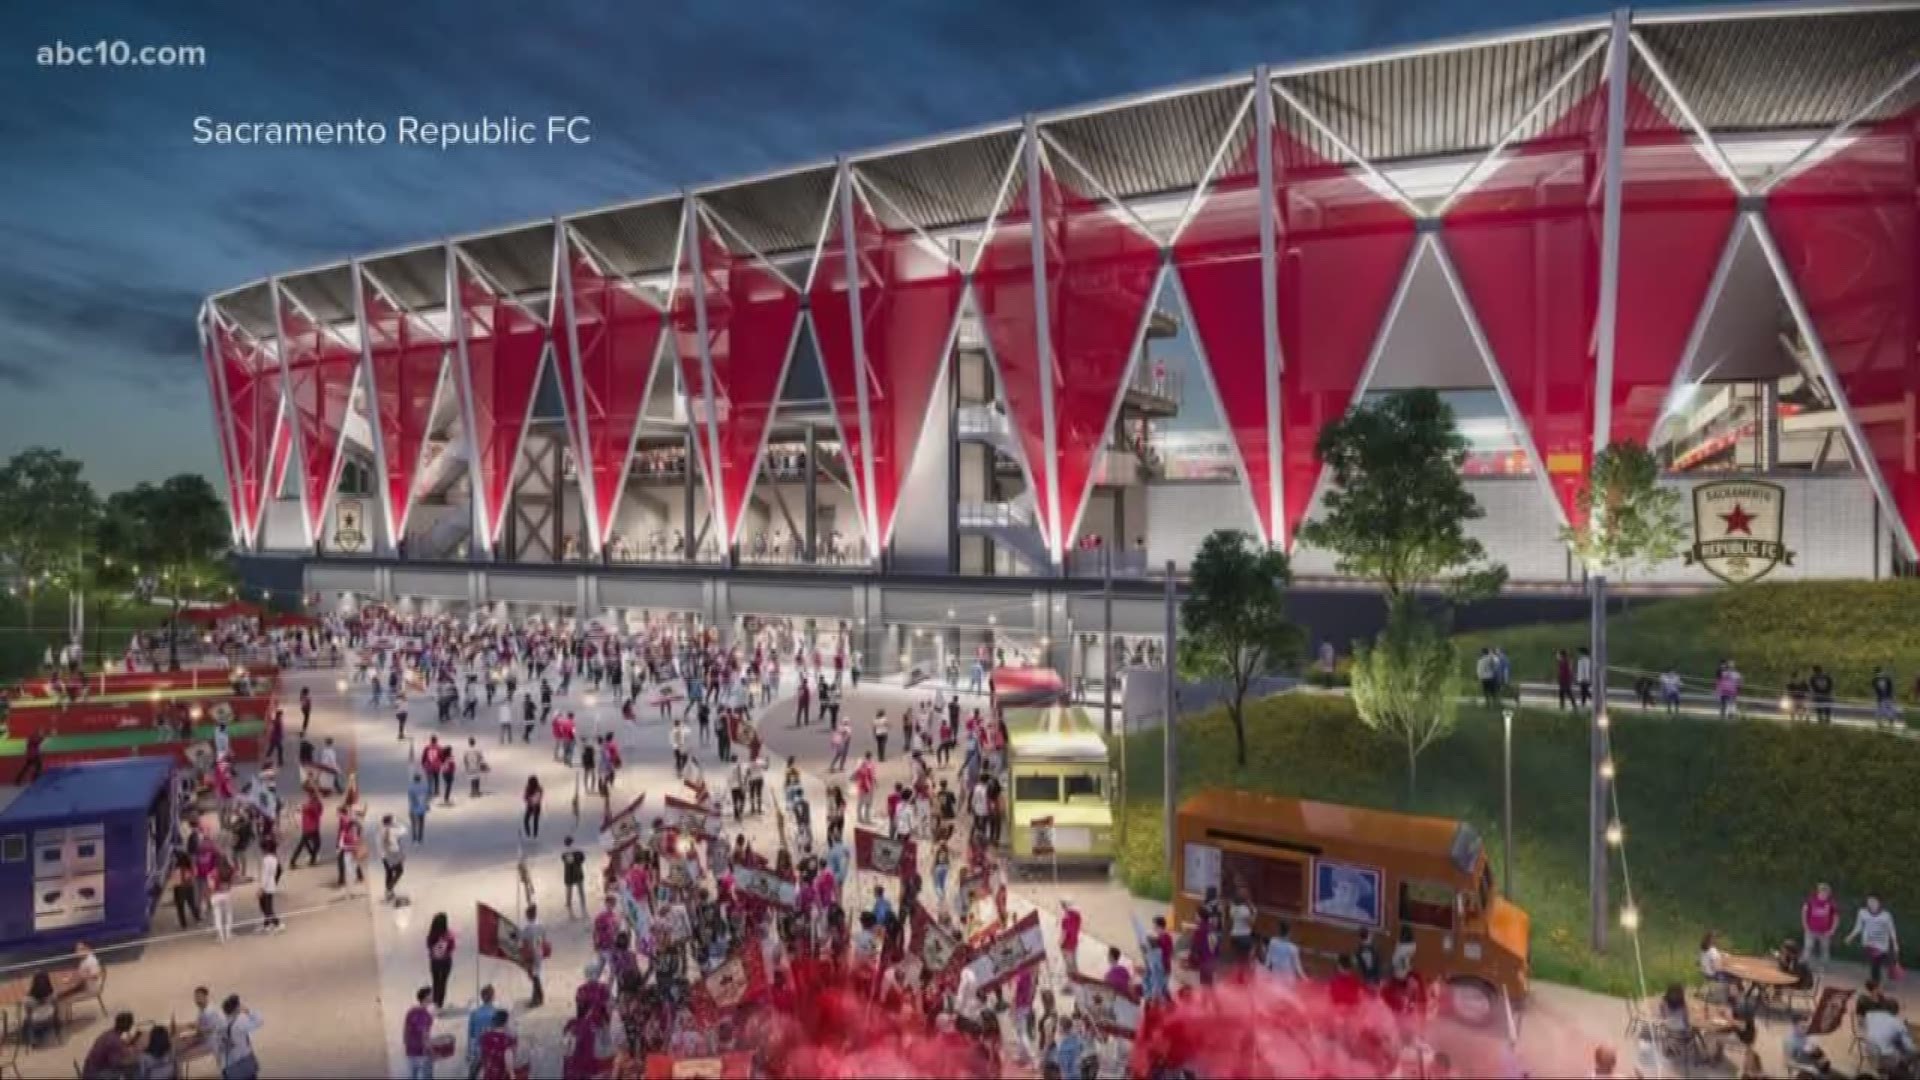 Major League Soccer will expand to 30 total teams in the upcoming years. And while the board did not identify markets, groups in Sacramento and St. Louis will be invited to give formal presentations to the league's expansion committee. So, what happens next?